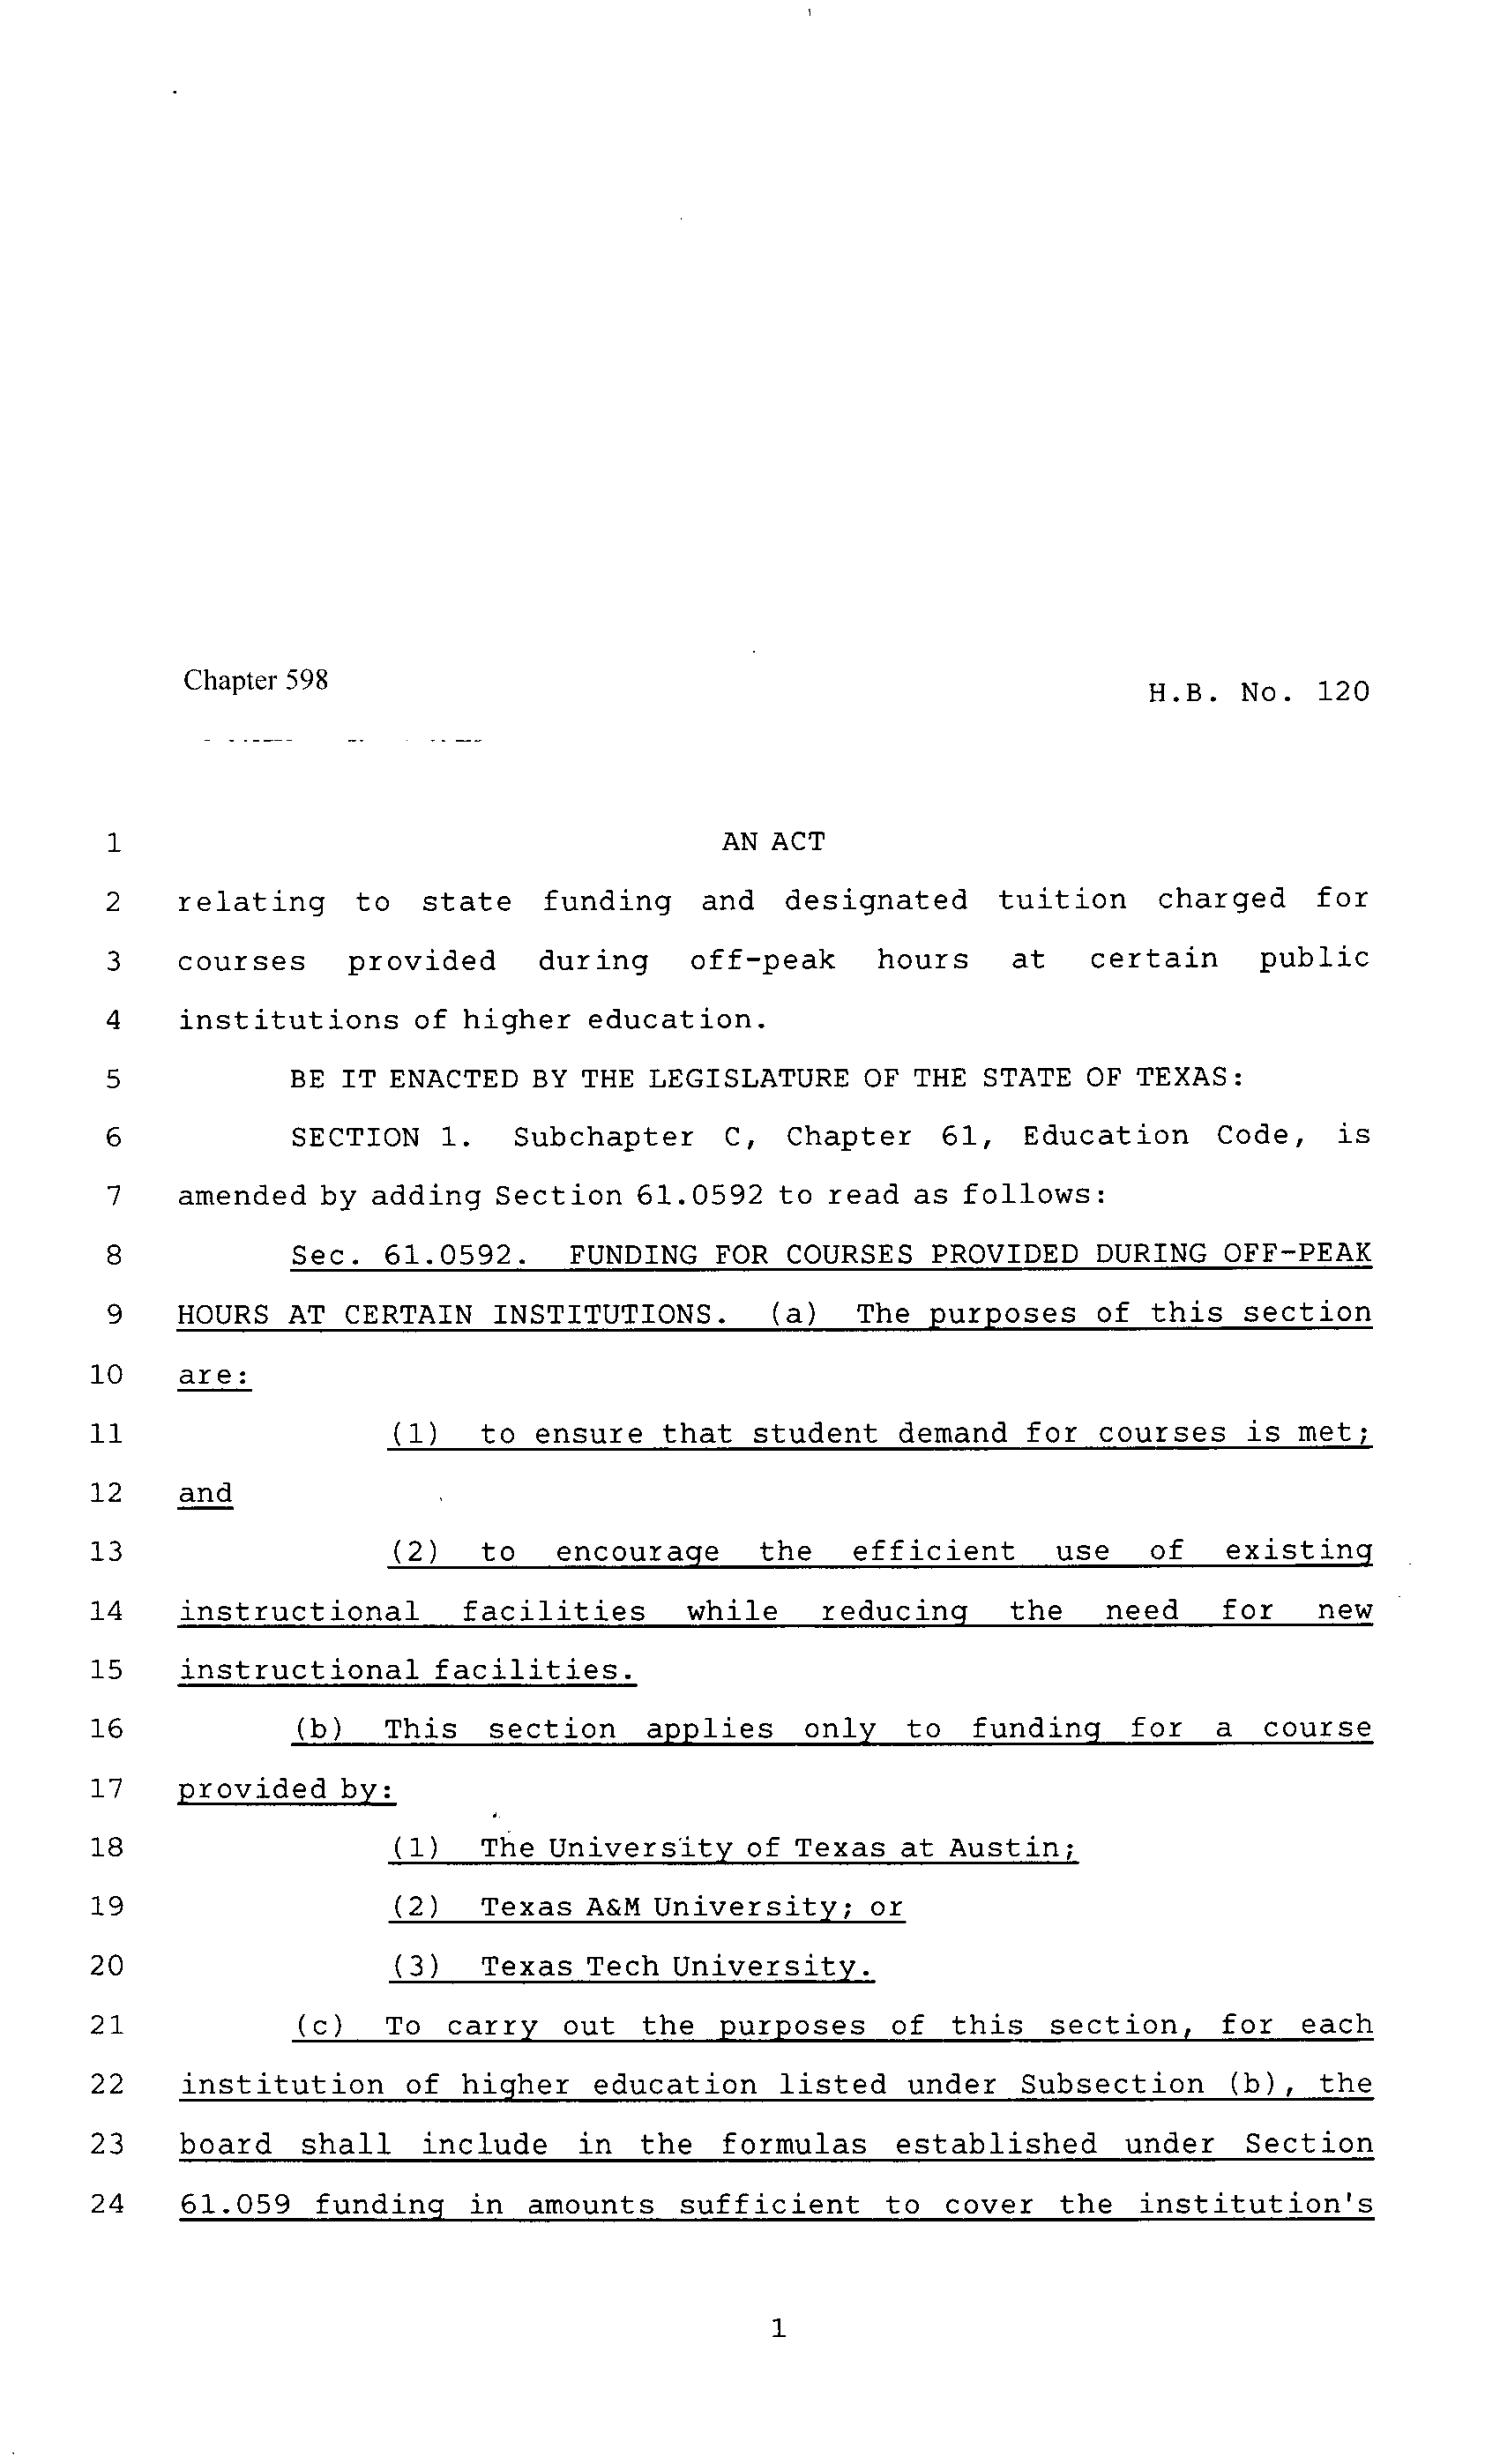 80th Texas Legislature, Regular Session, House Bill 120, Chapter 598
                                                
                                                    [Sequence #]: 1 of 4
                                                